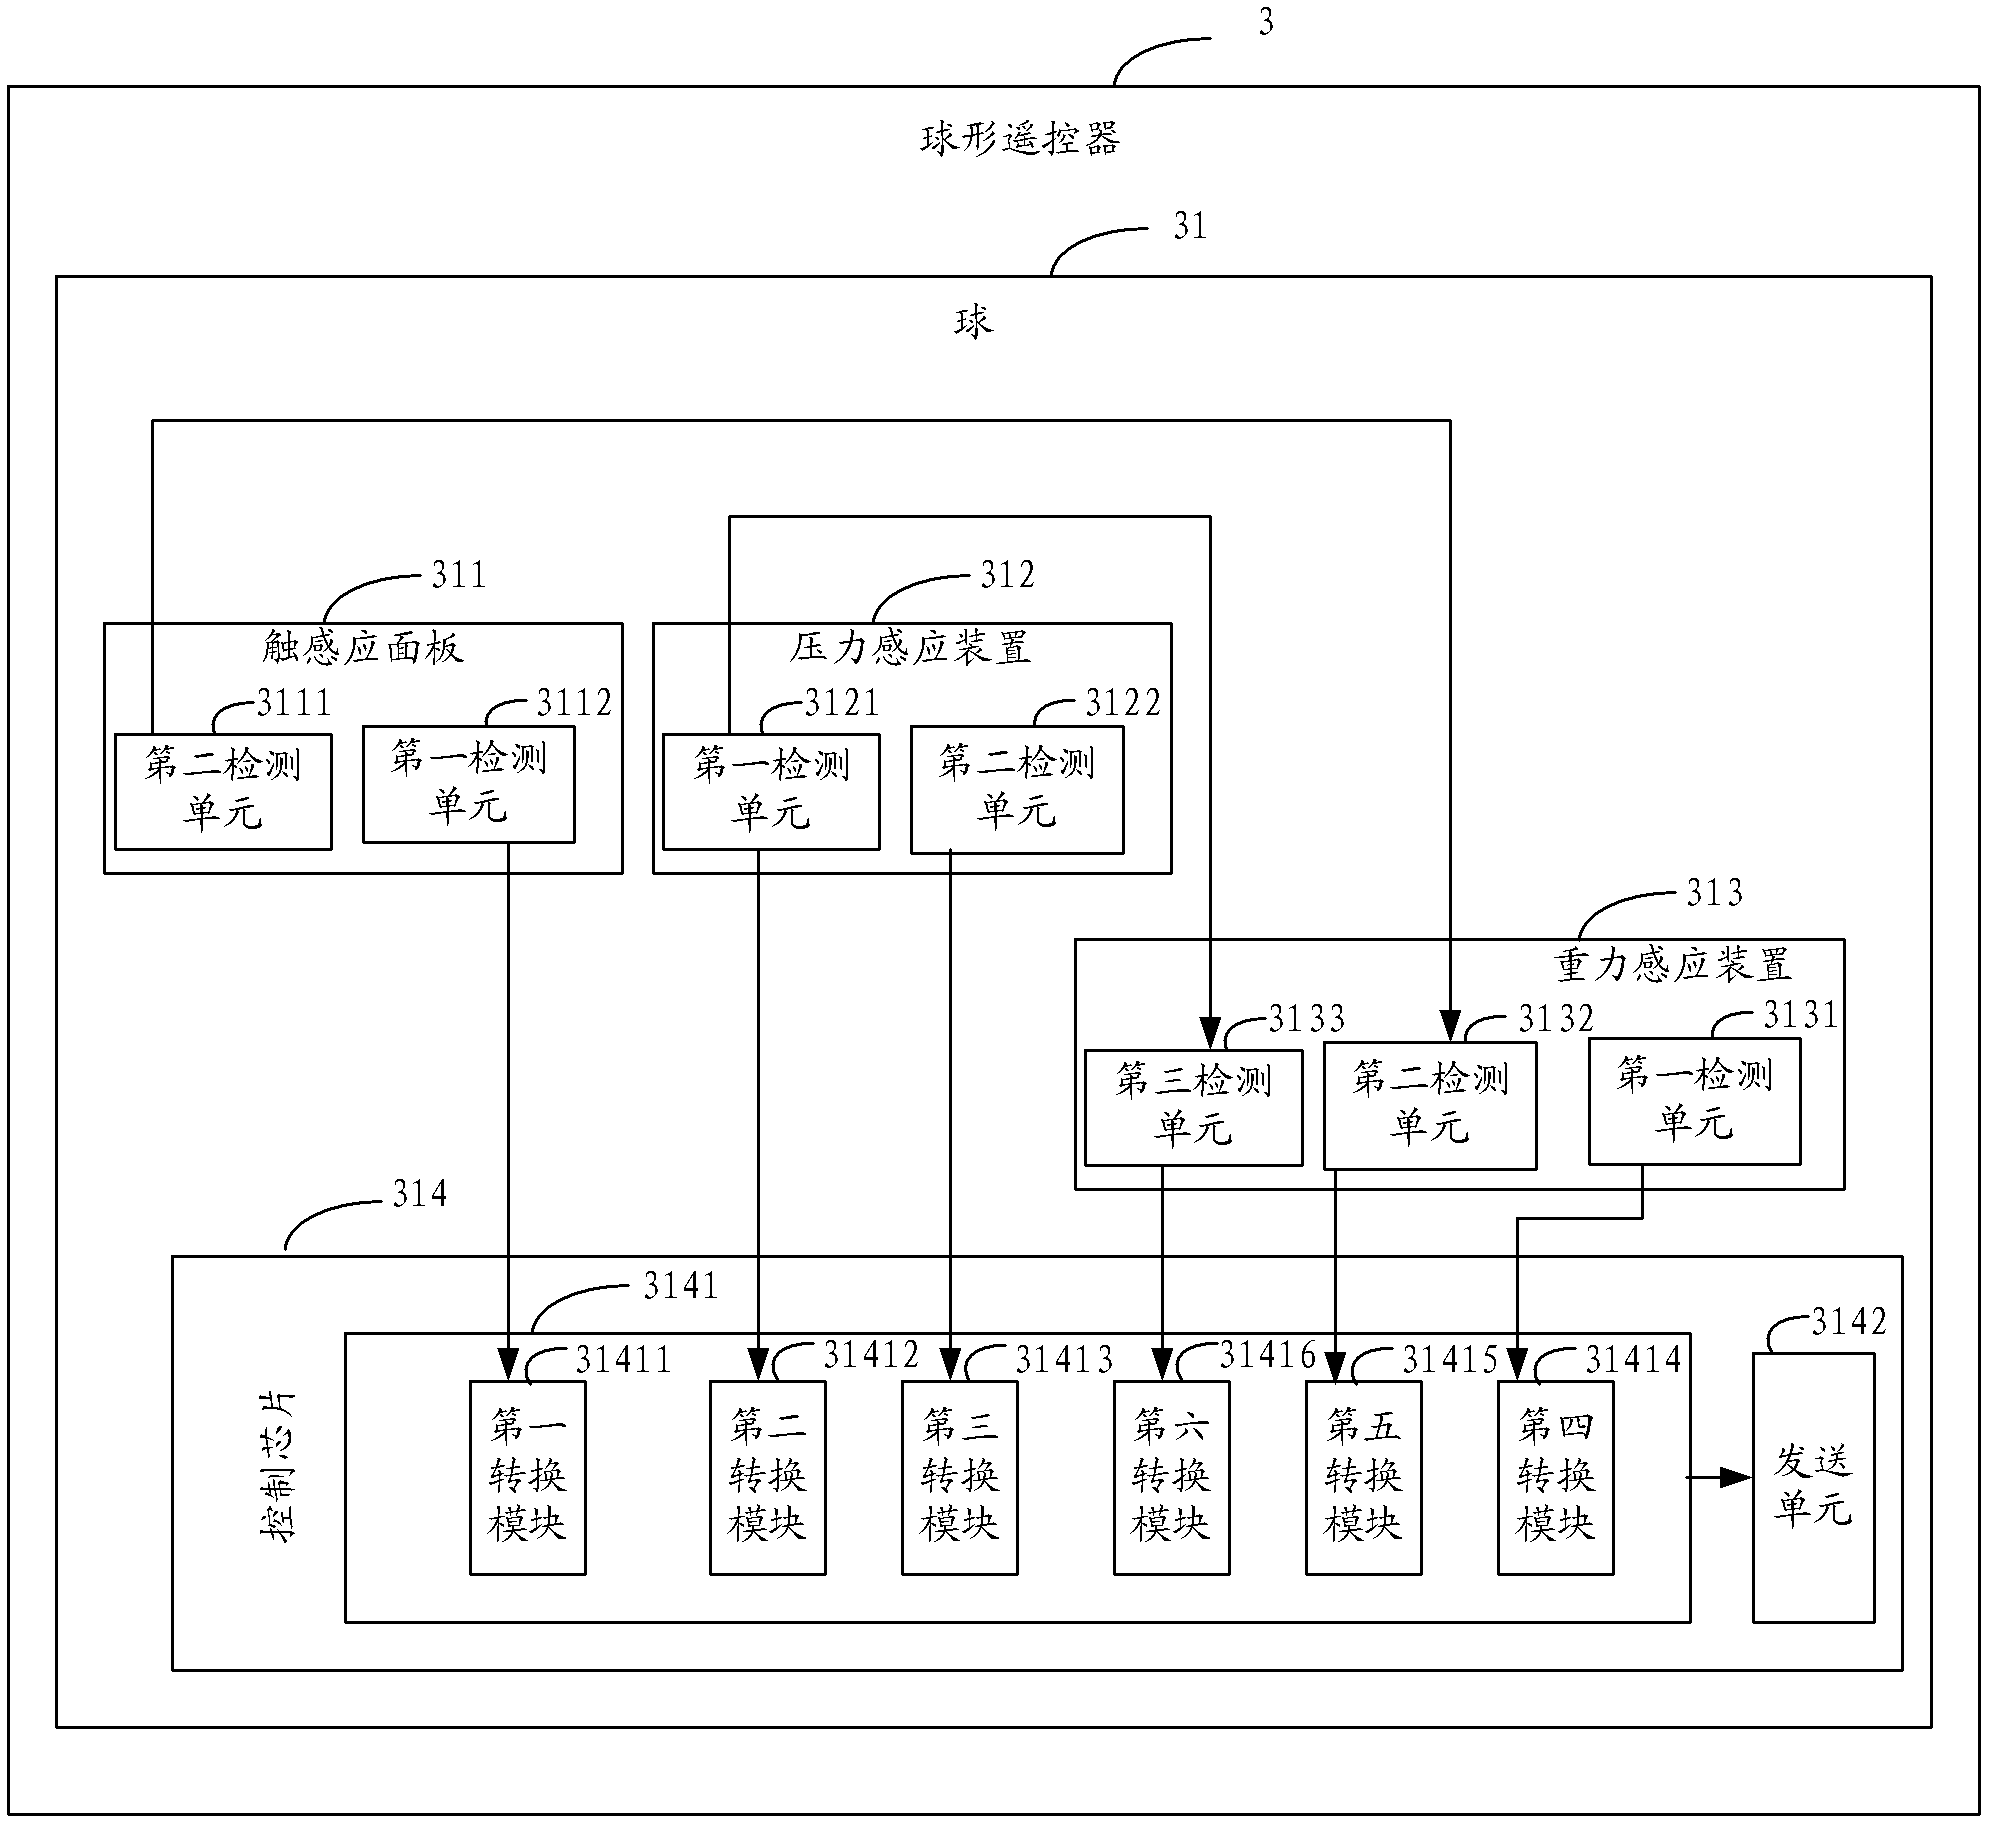 Remote control method of spherical remote controller and control chip